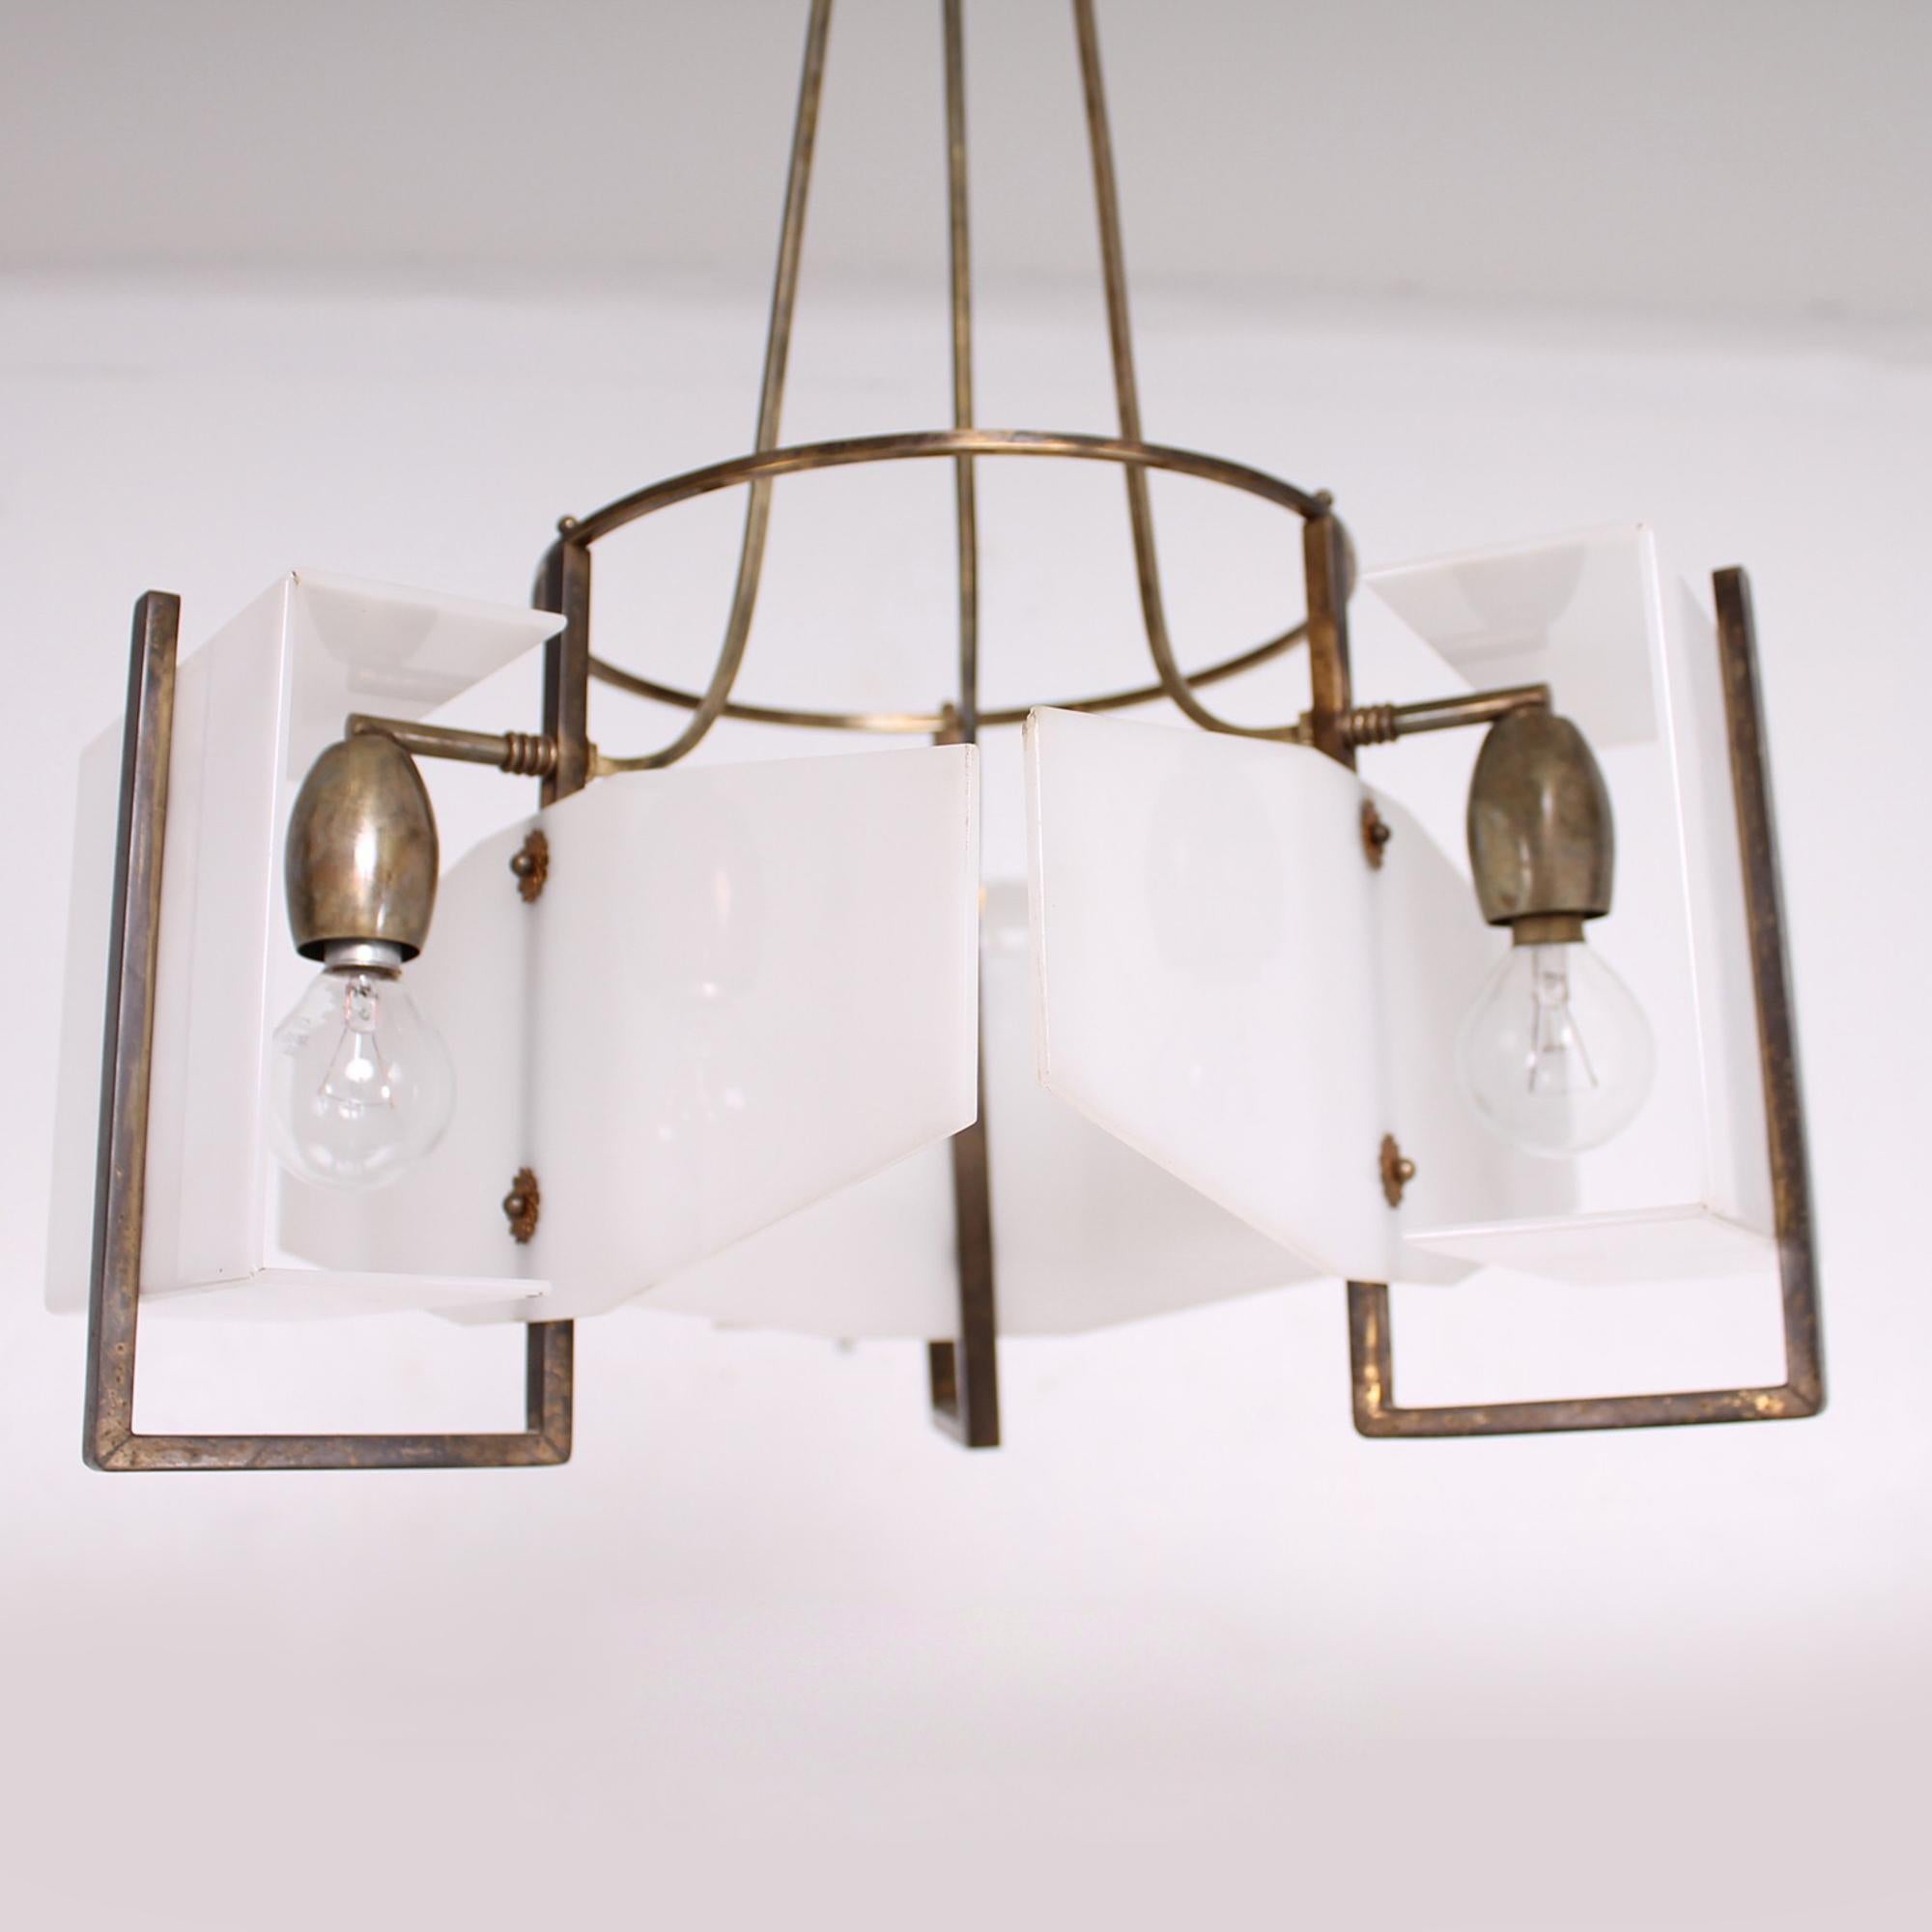 Mid-20th Century 1950s Italy Modernist Patinated Brass & White Acrylic Chandelier Style of OLUCE